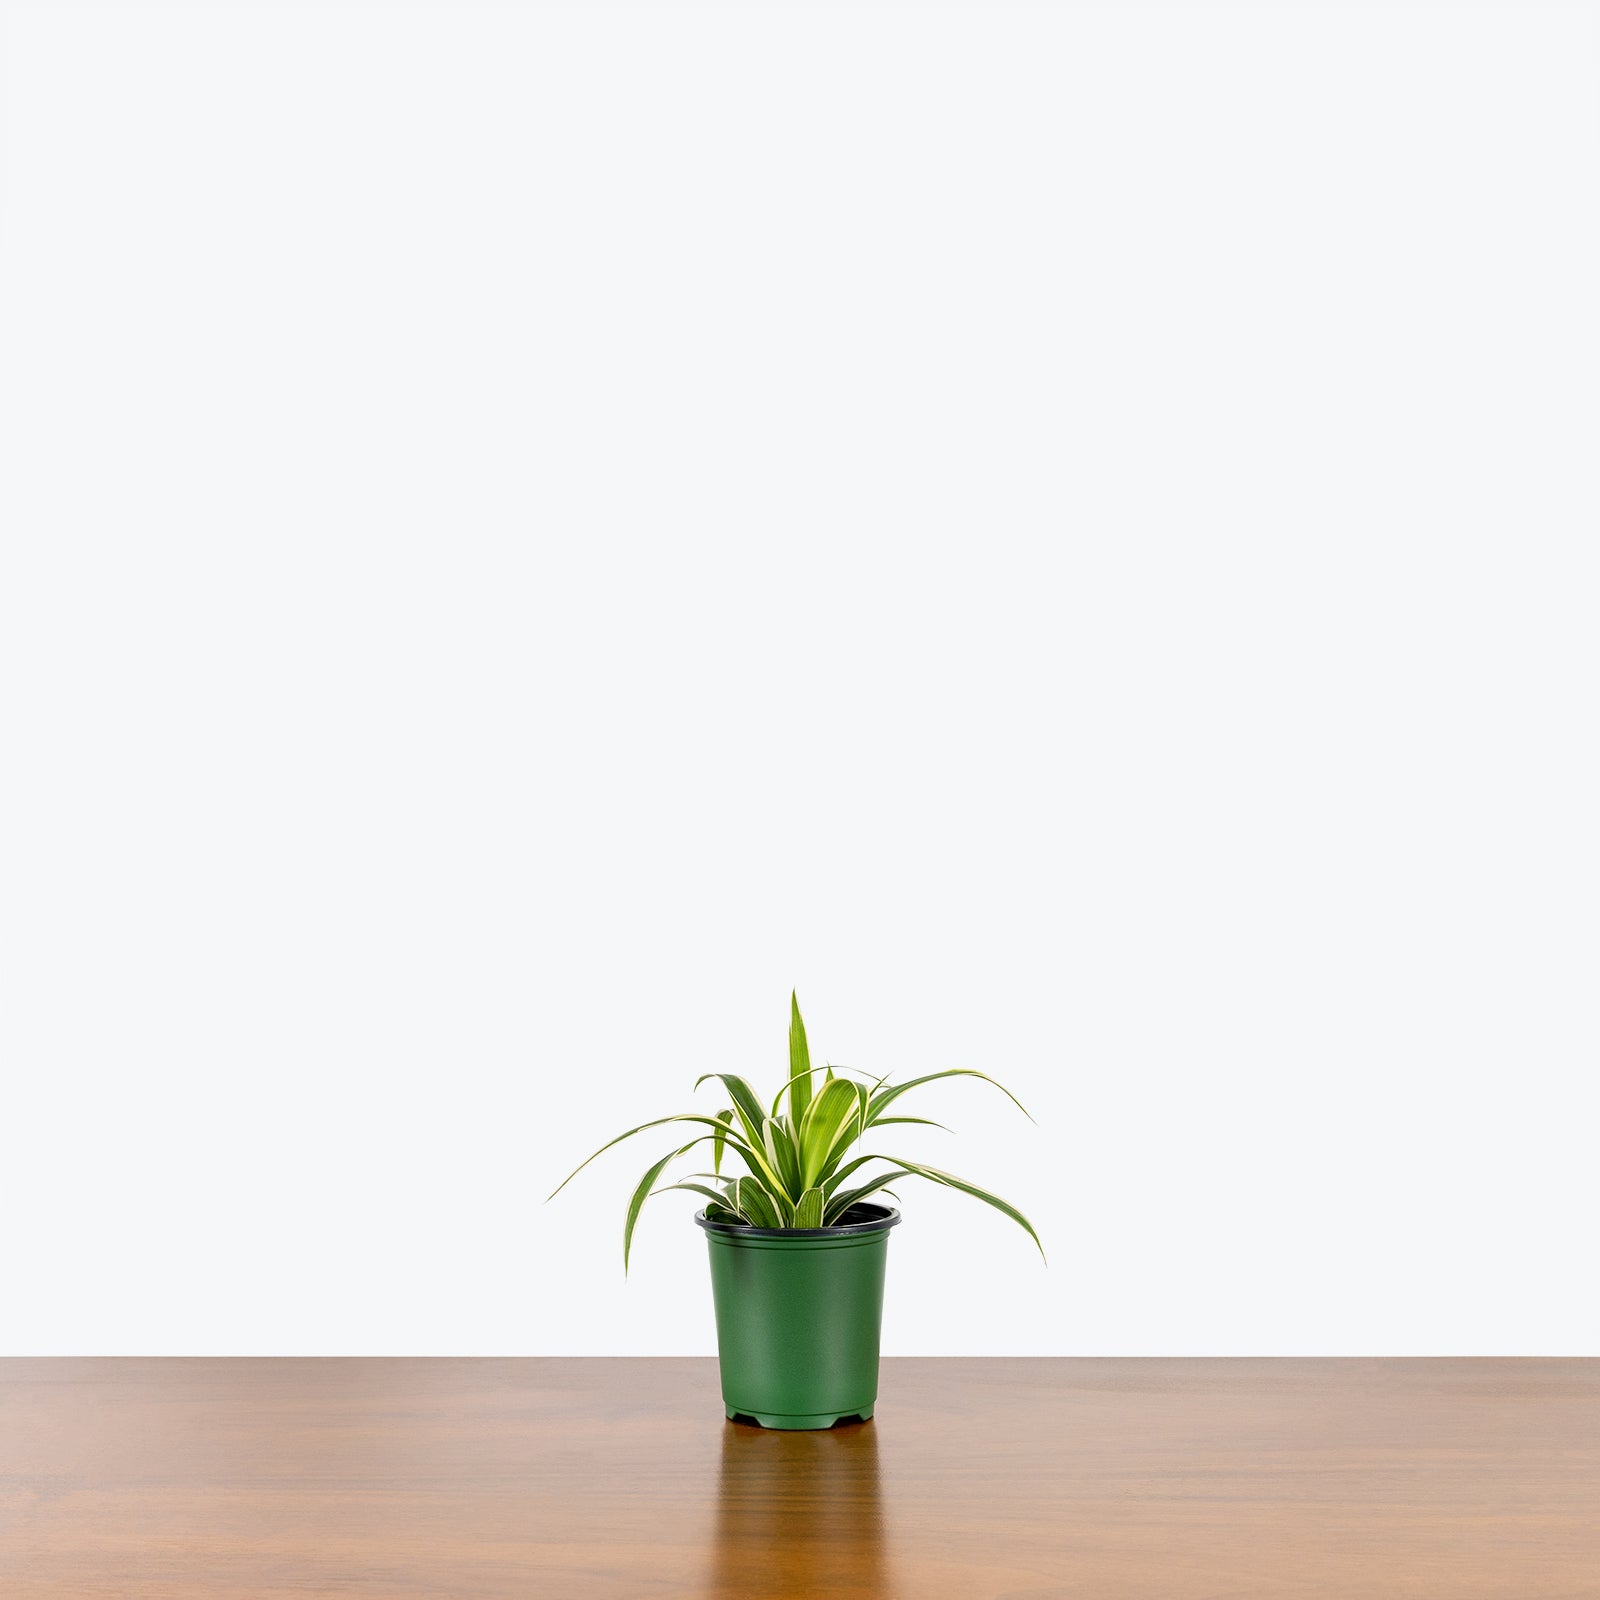 Spider Plant Reverse Variegated | Care Guide and Pro Tips - Delivery from Toronto across Canada - JOMO Studio